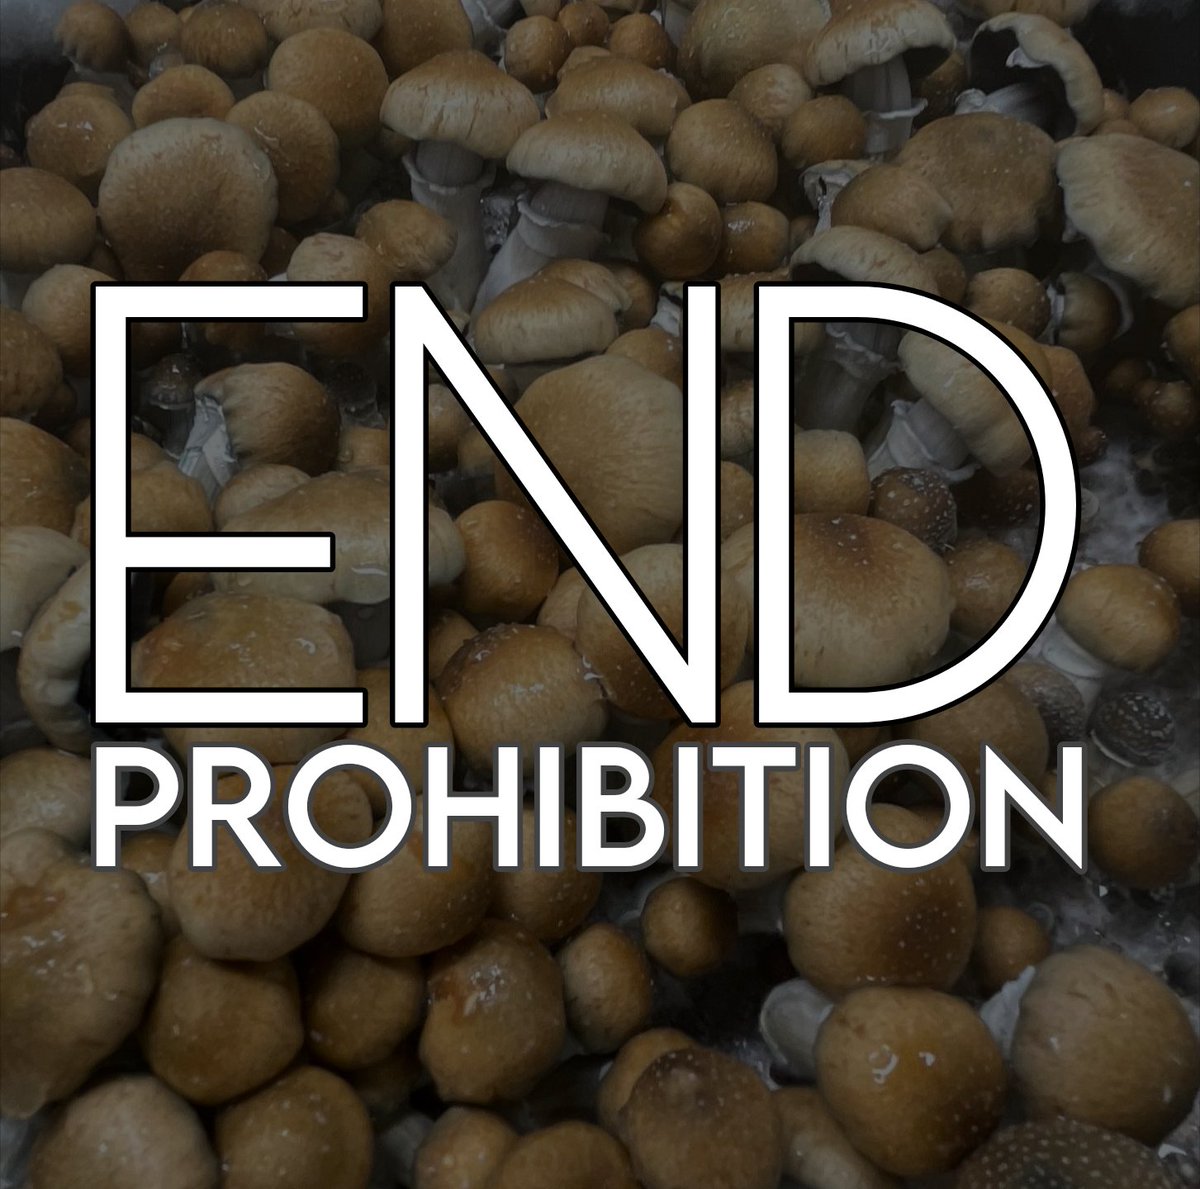 Prohibition doesn't work. It's never worked. It will never work. 🖖👽 #EndProhibition